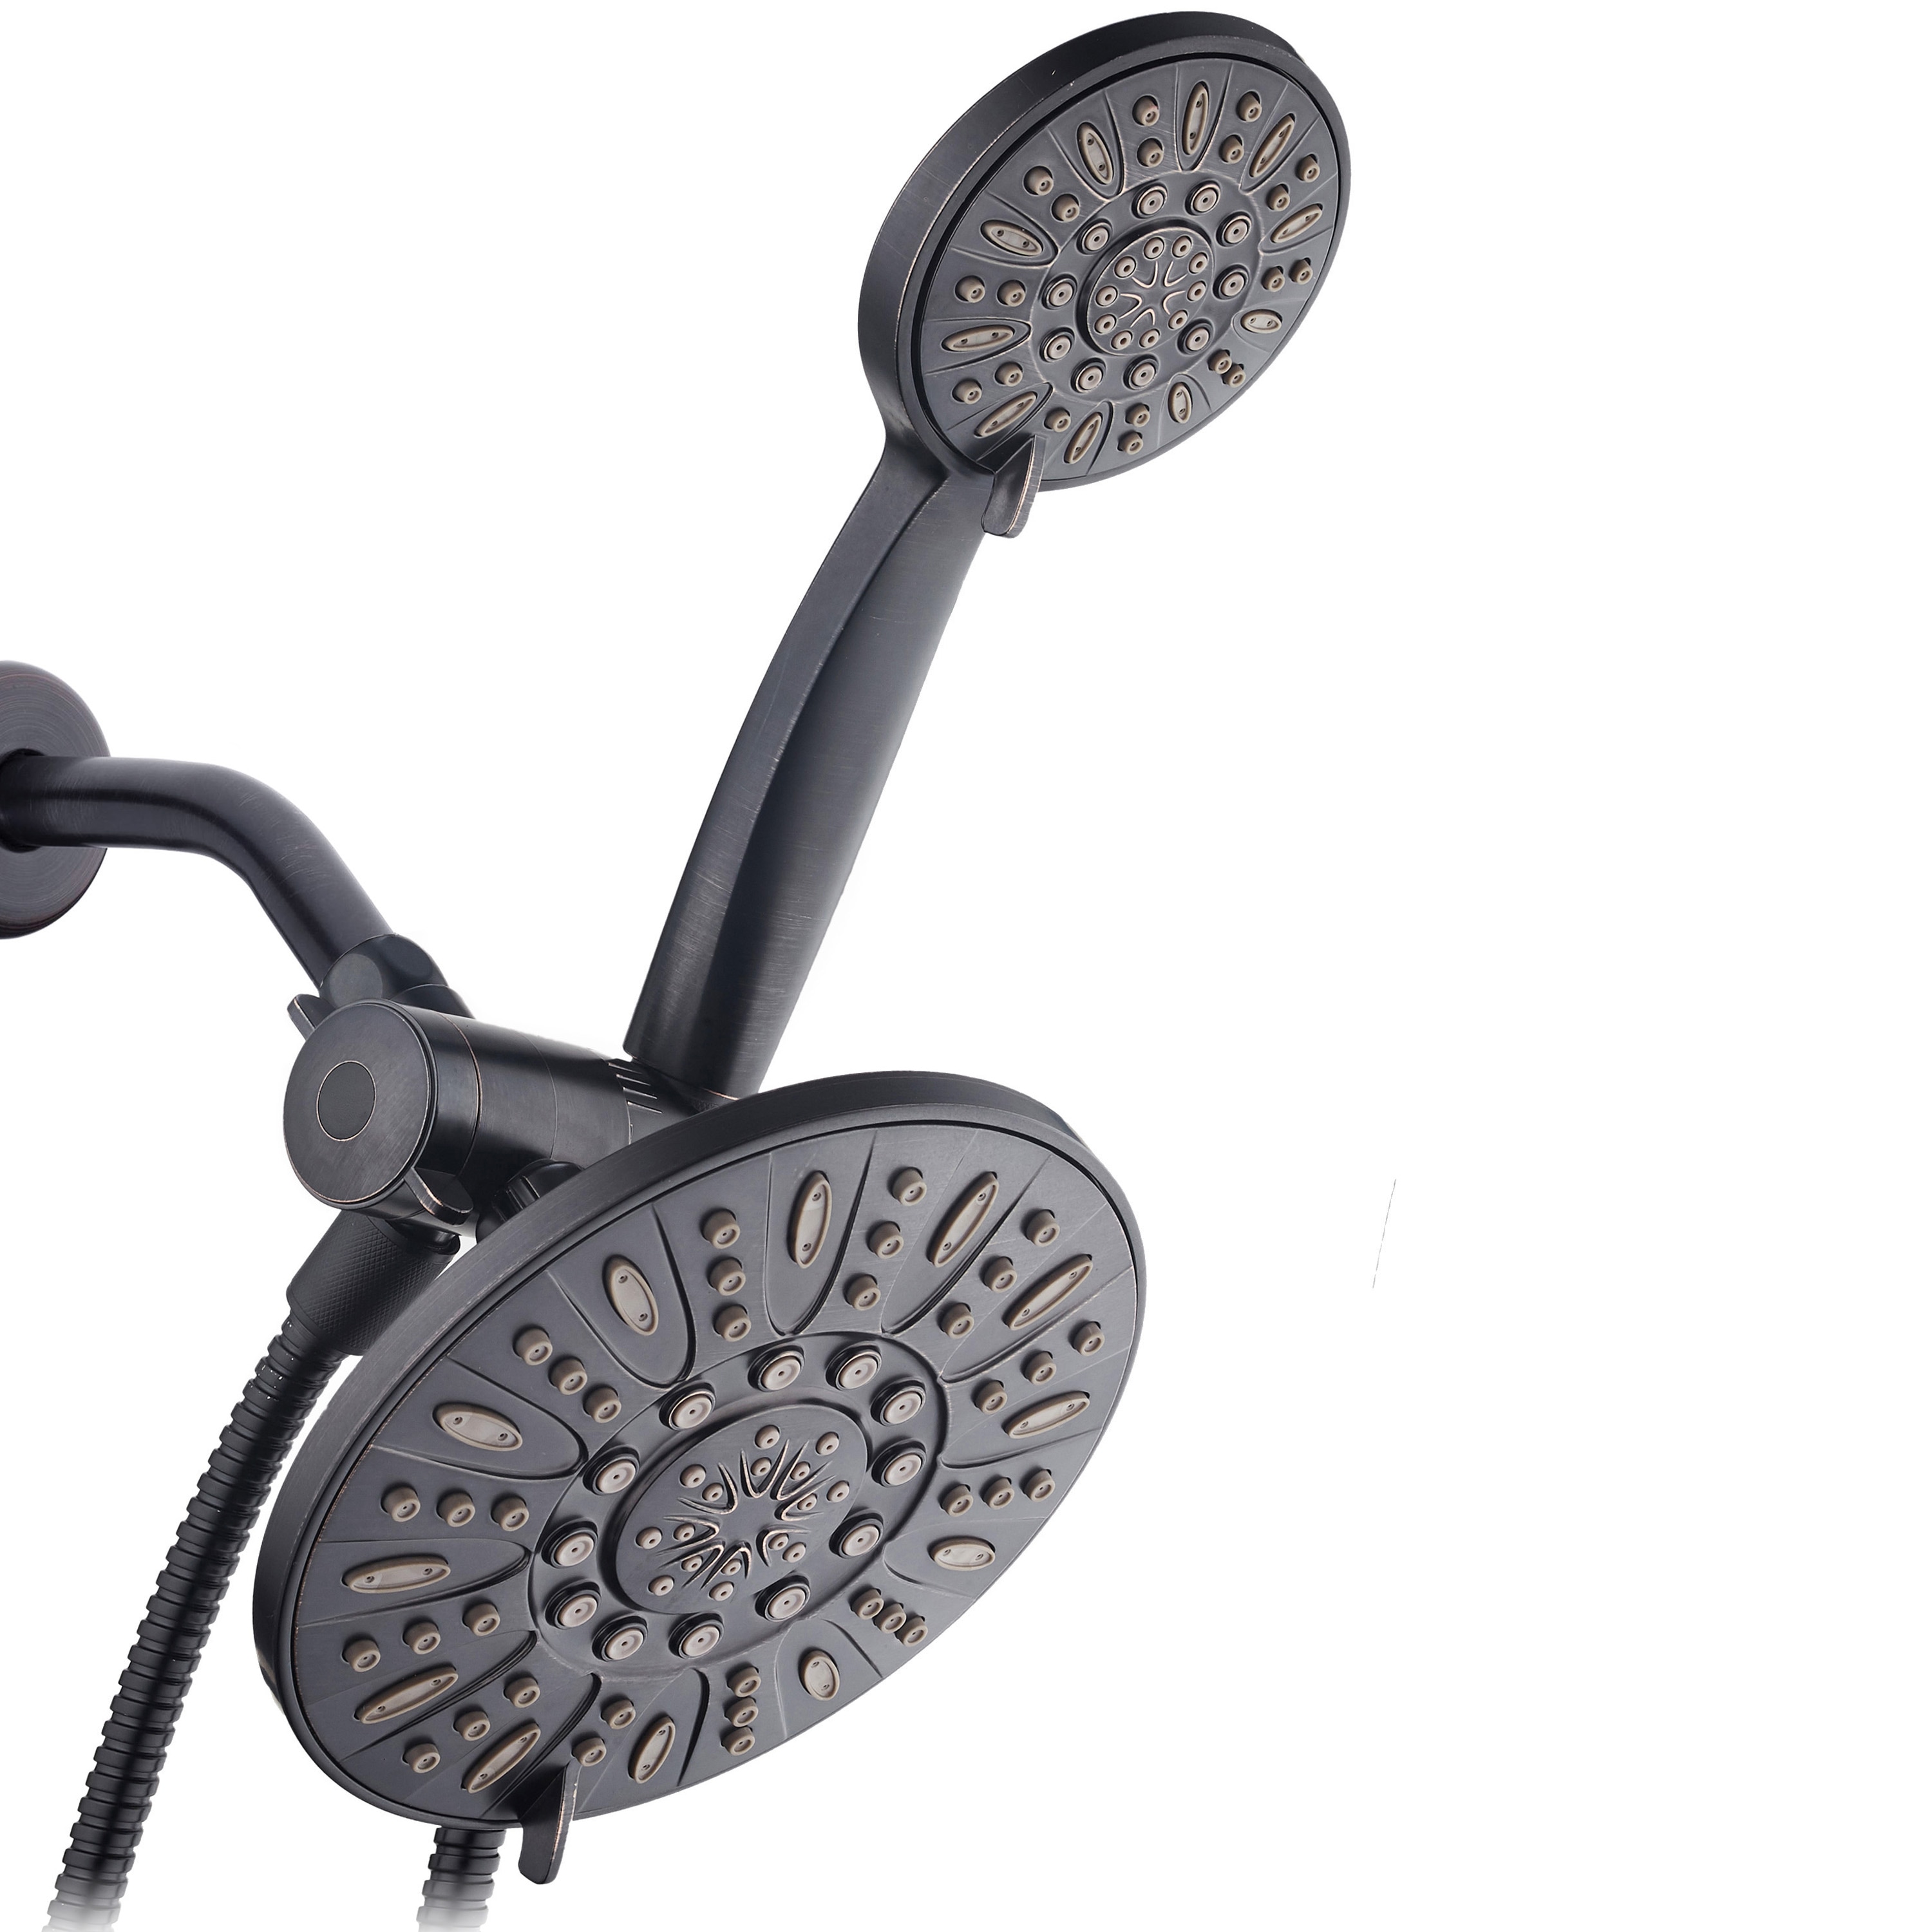 Enjoy Luxurious Rain Head and 6-Setting Hand Held Shower Separately or Together AquaDance Oil Rubbed Bronze Premium High Pressure 48 3-Way Combo for The Best of Both Worlds 